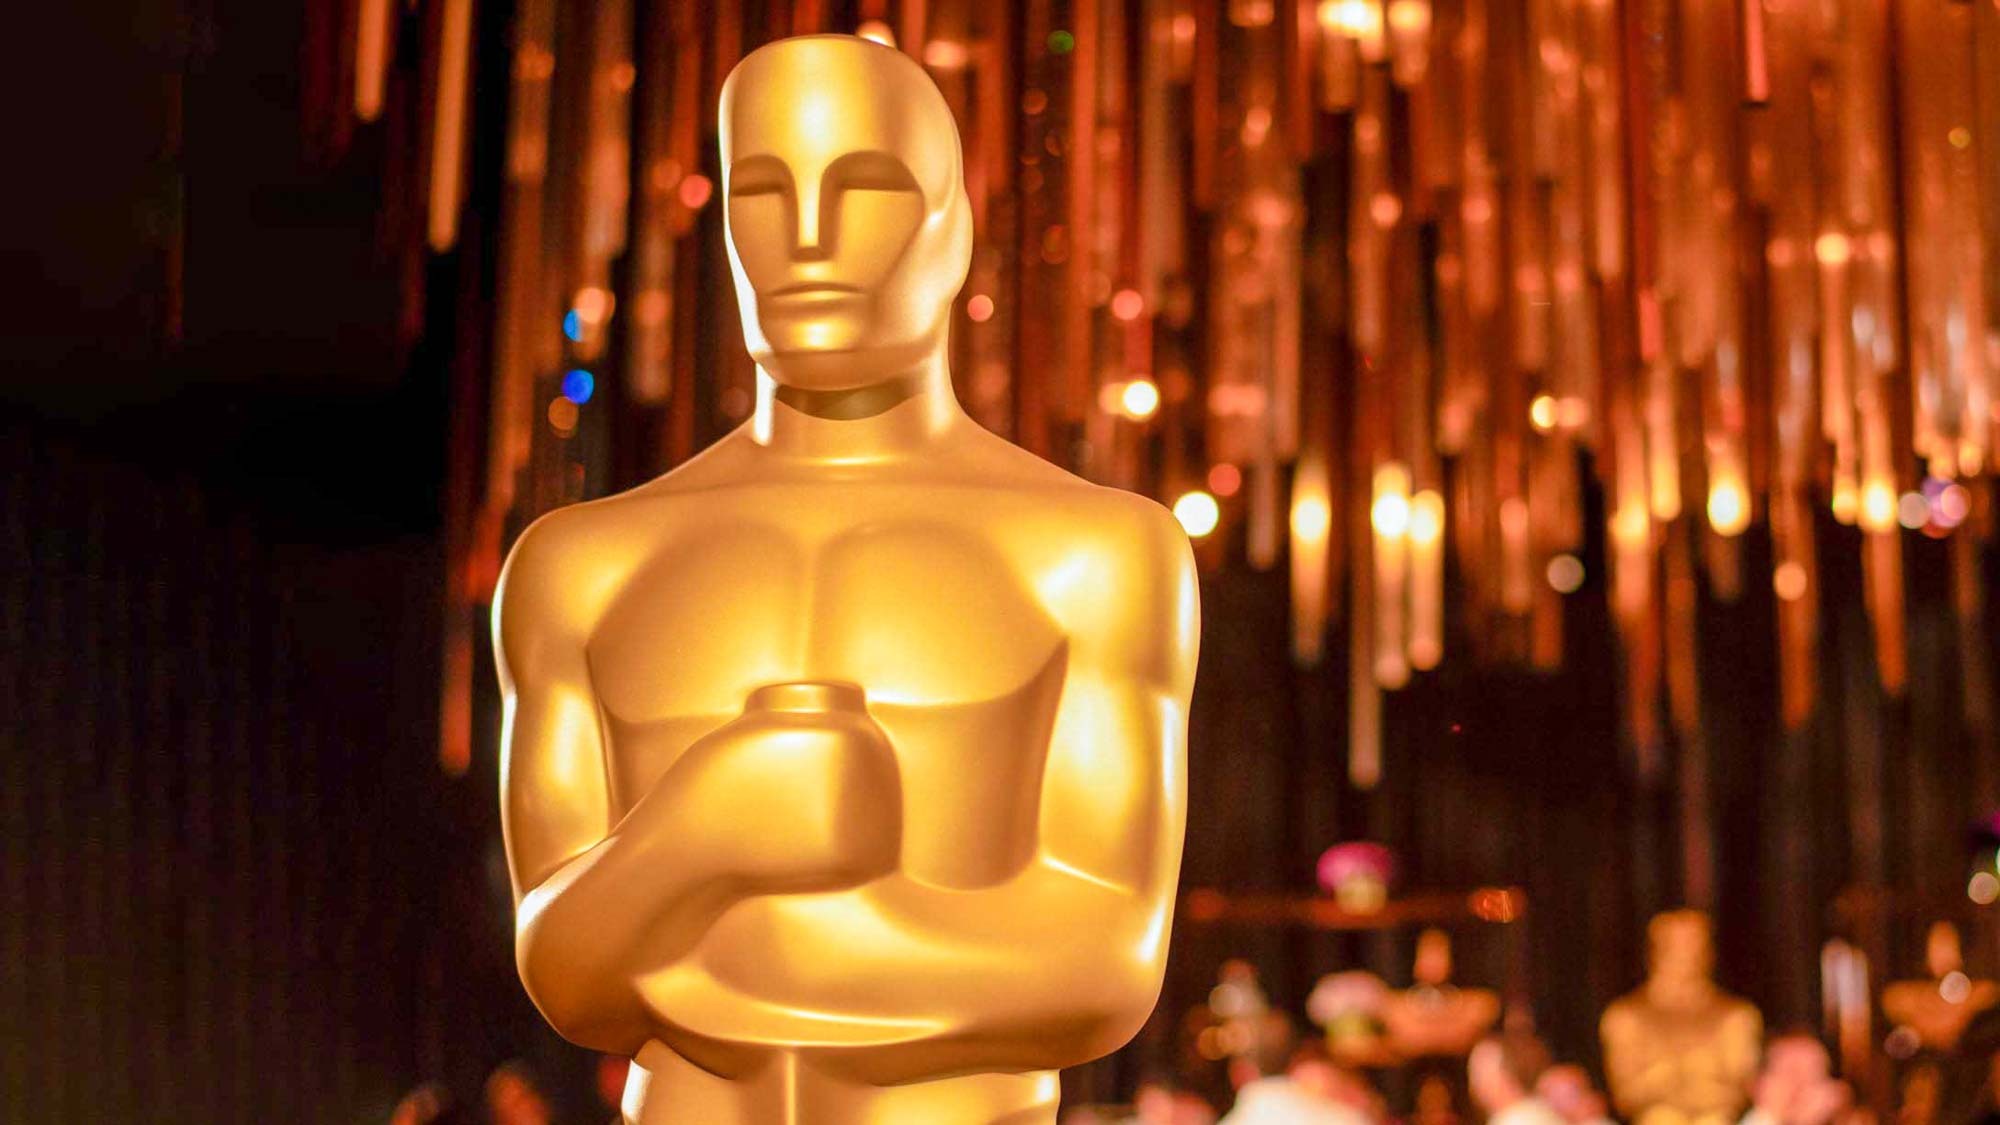 scores 12 Oscar nominations as streaming services lead the